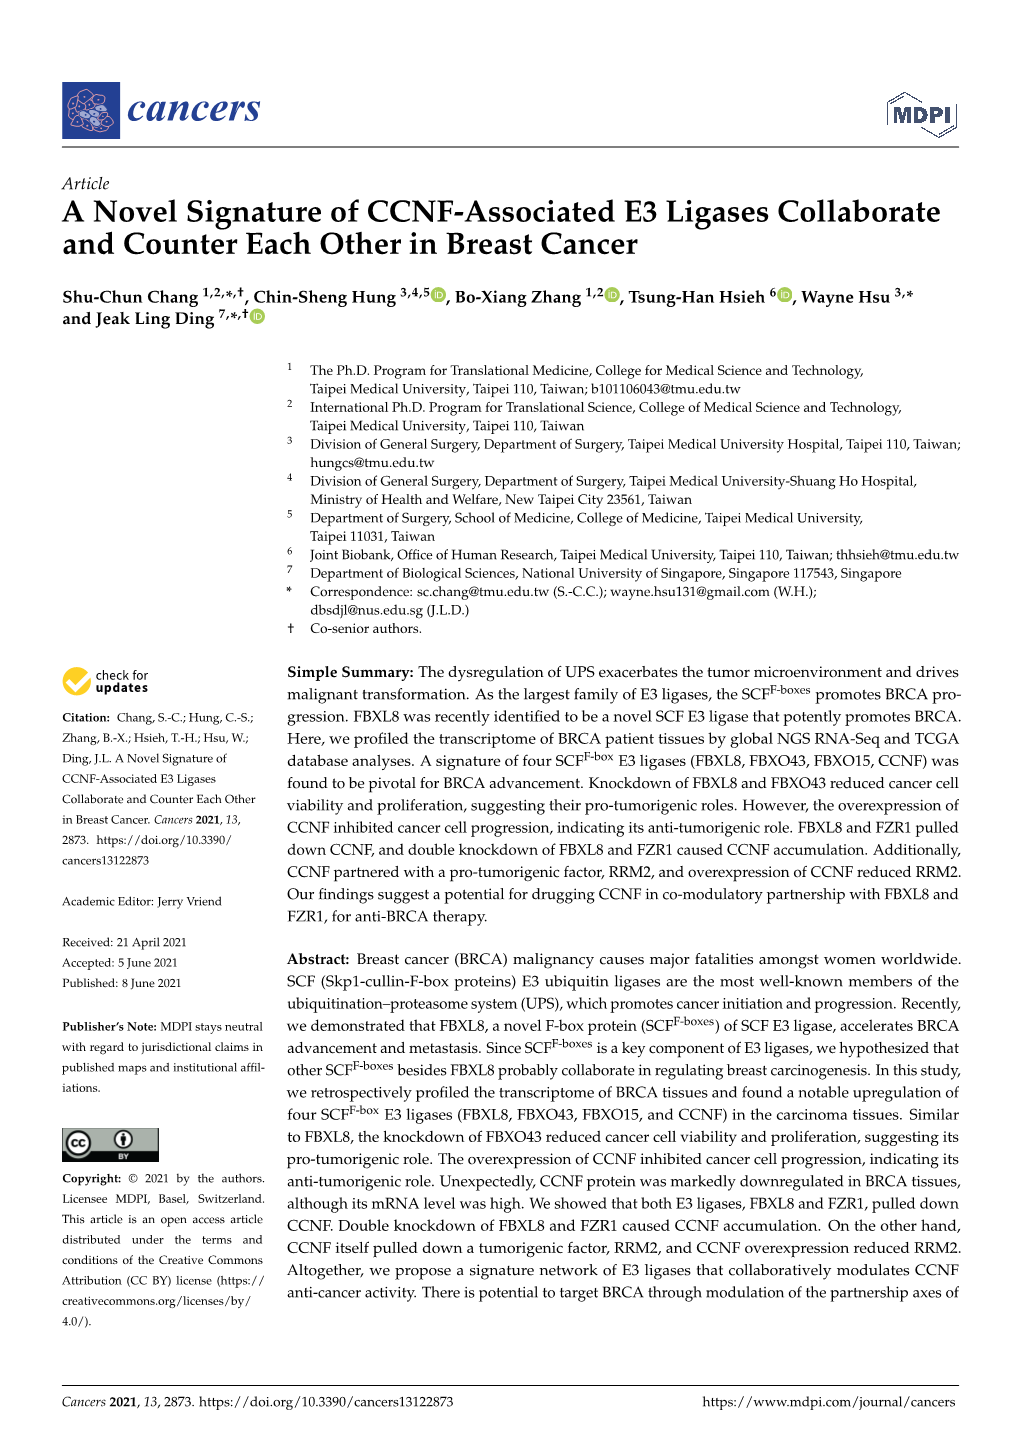 A Novel Signature of CCNF-Associated E3 Ligases Collaborate and Counter Each Other in Breast Cancer